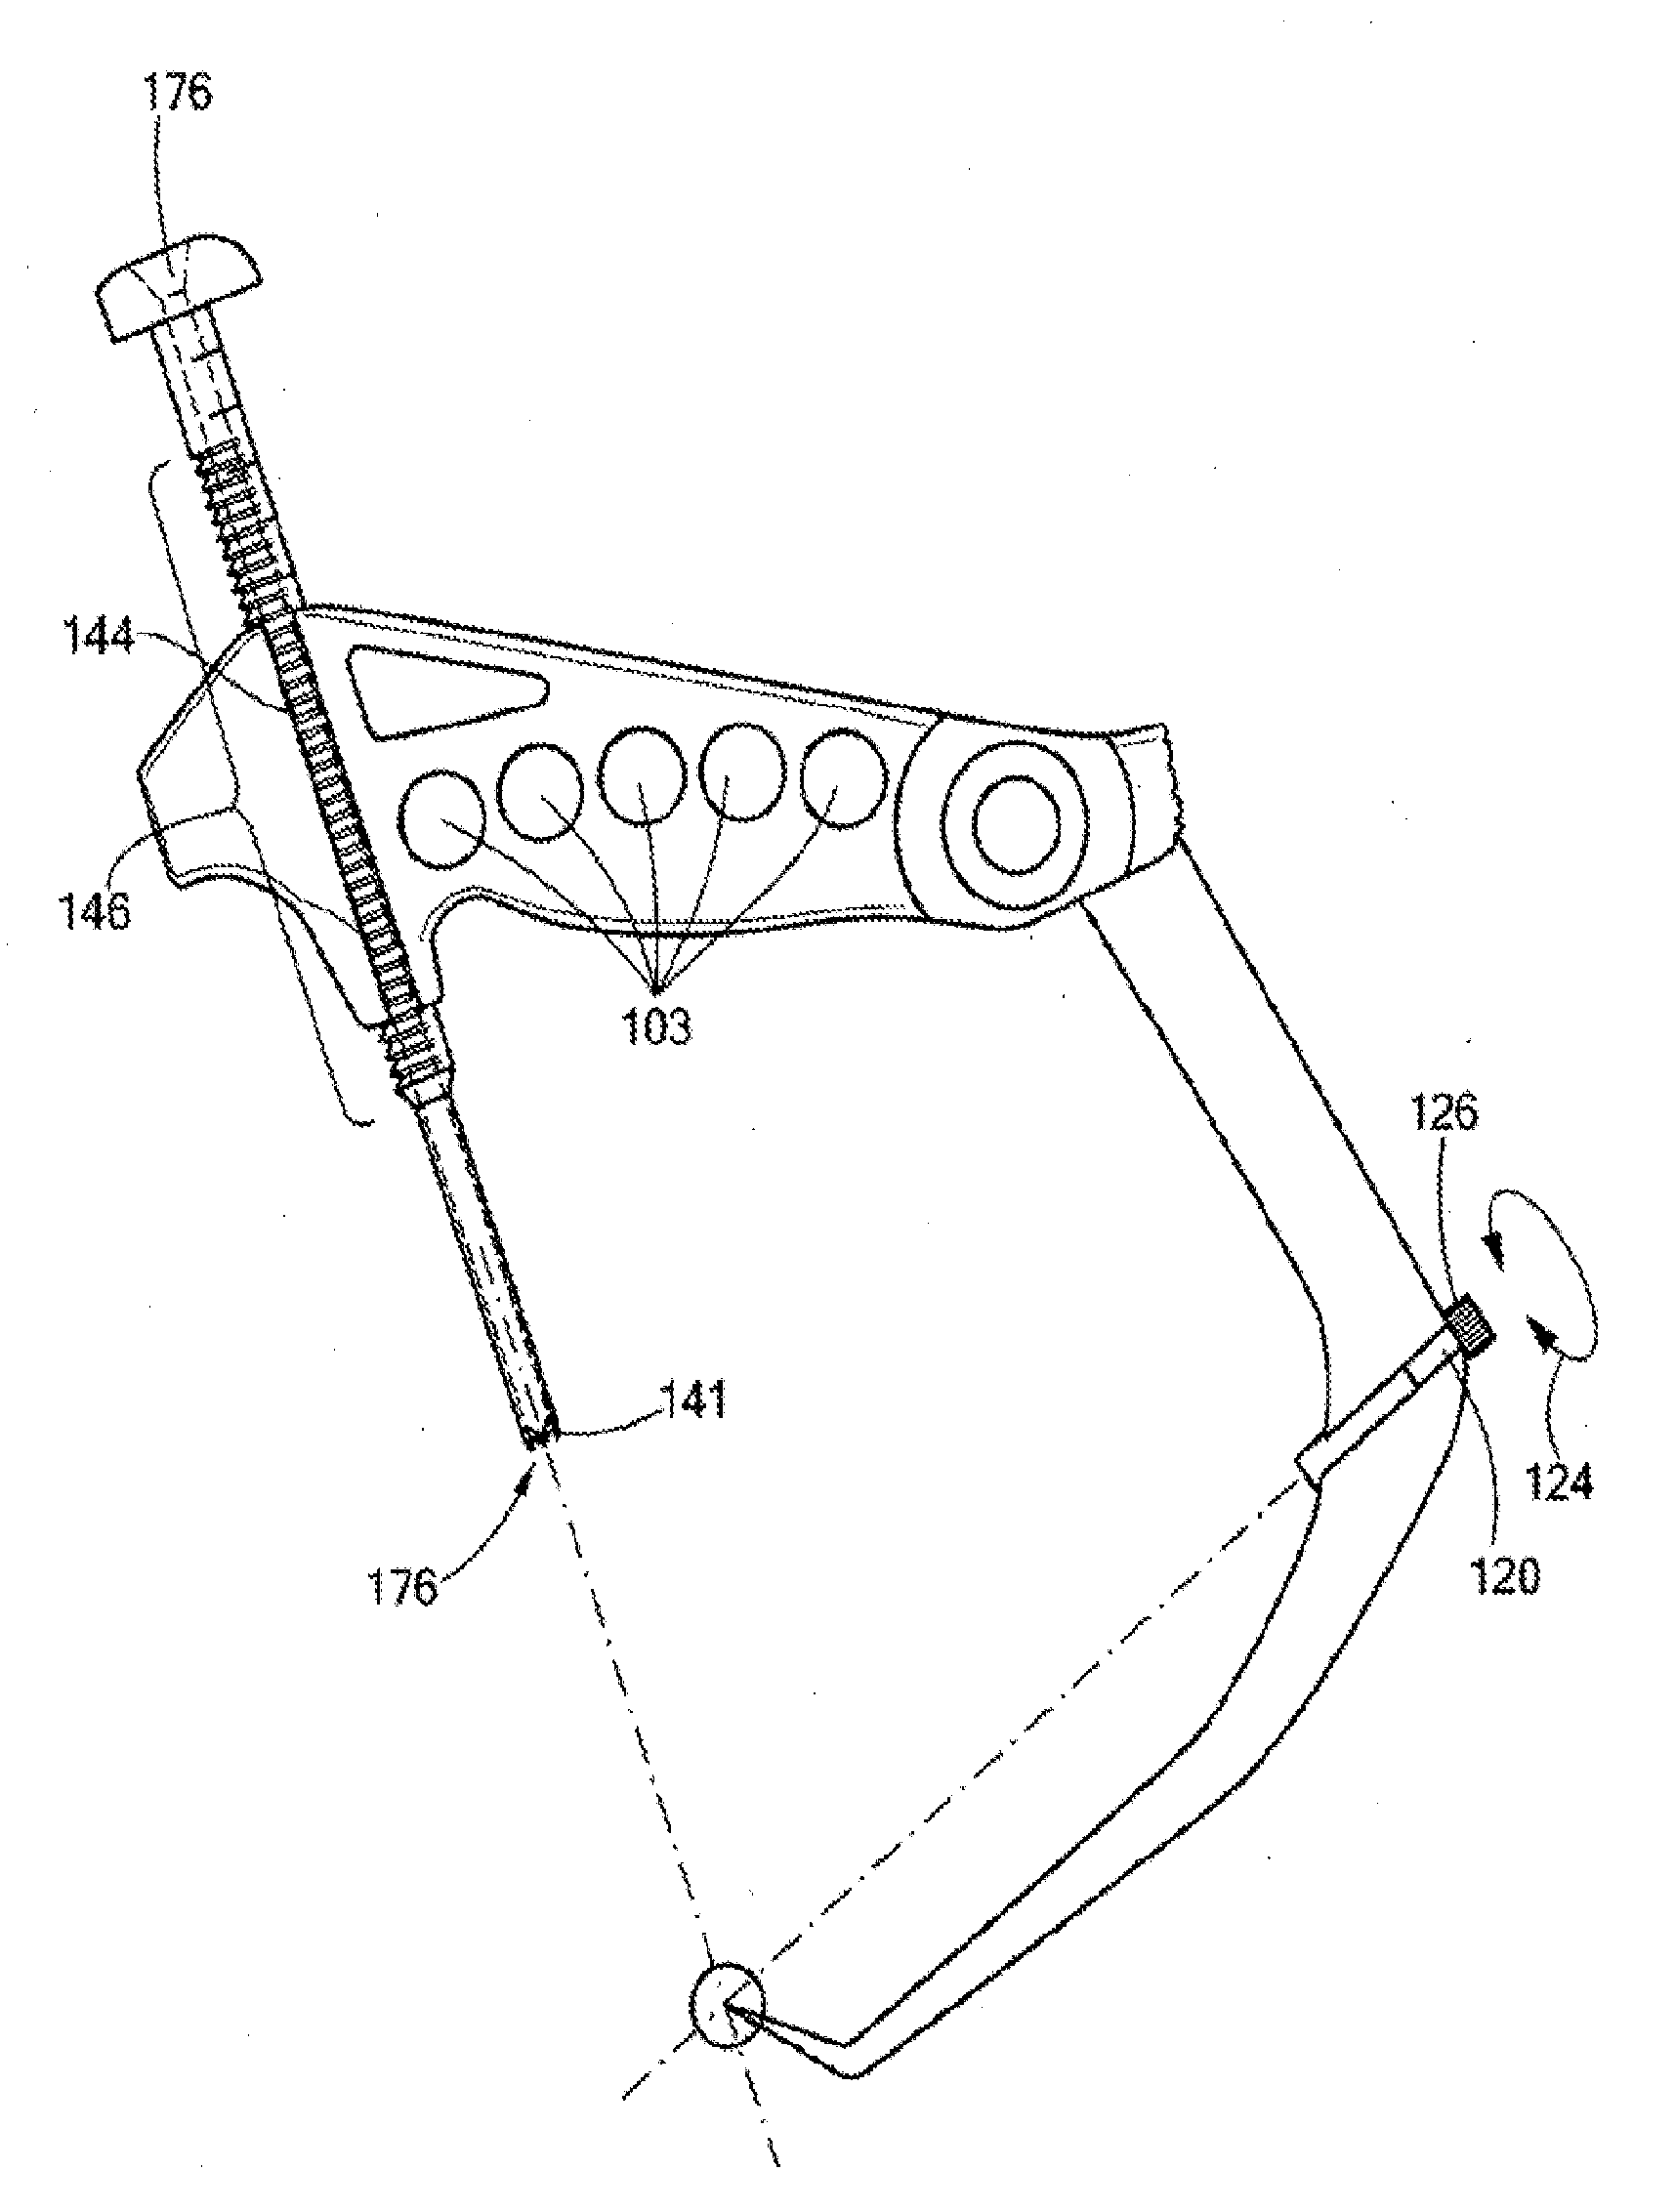 Surgical aiming device